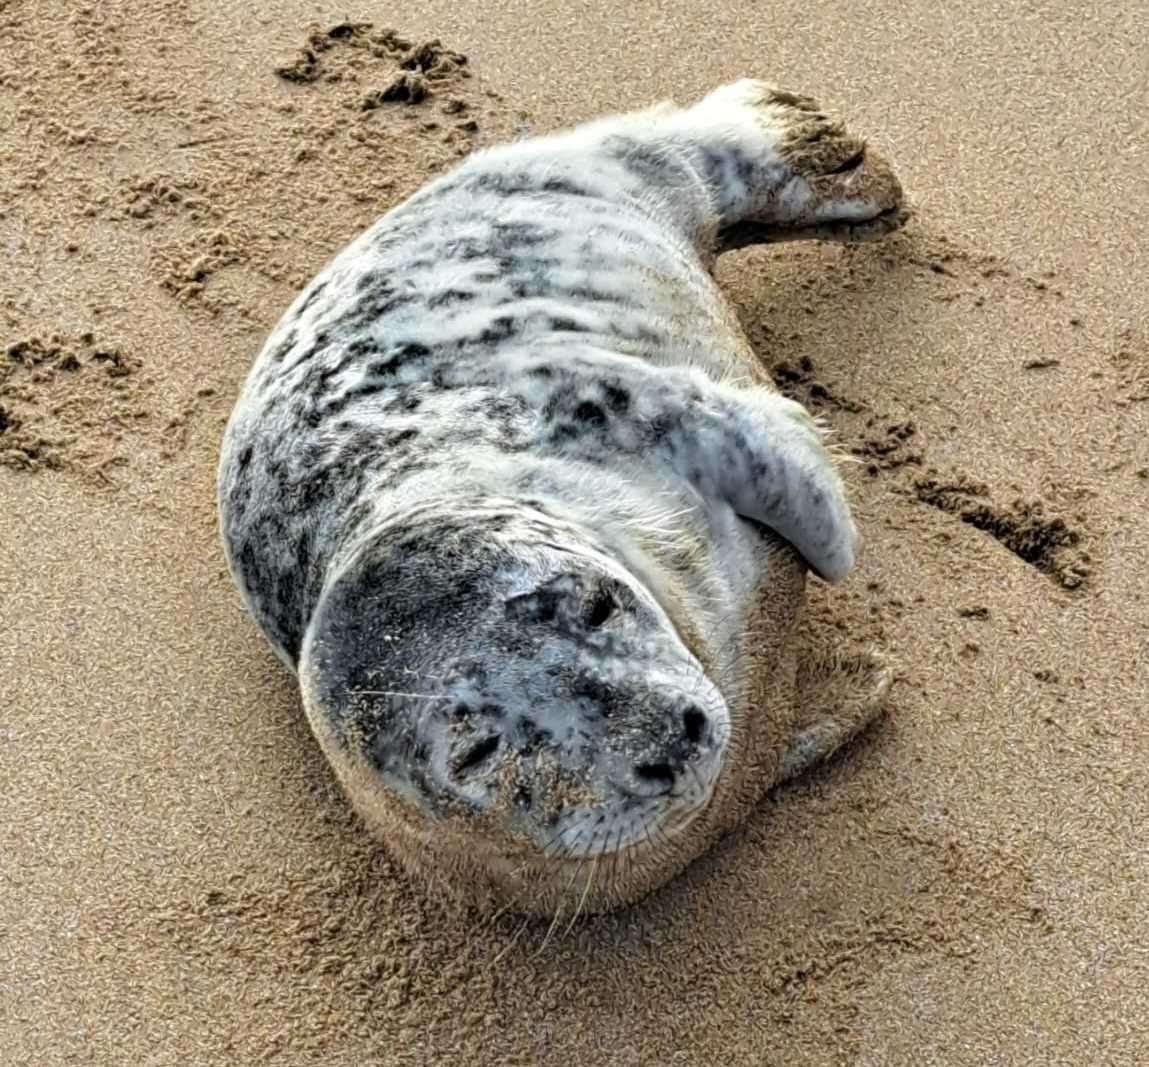 An underweight seal has been rescued from a Ramsgate beach. Picture: Shelia Stone (62331834)